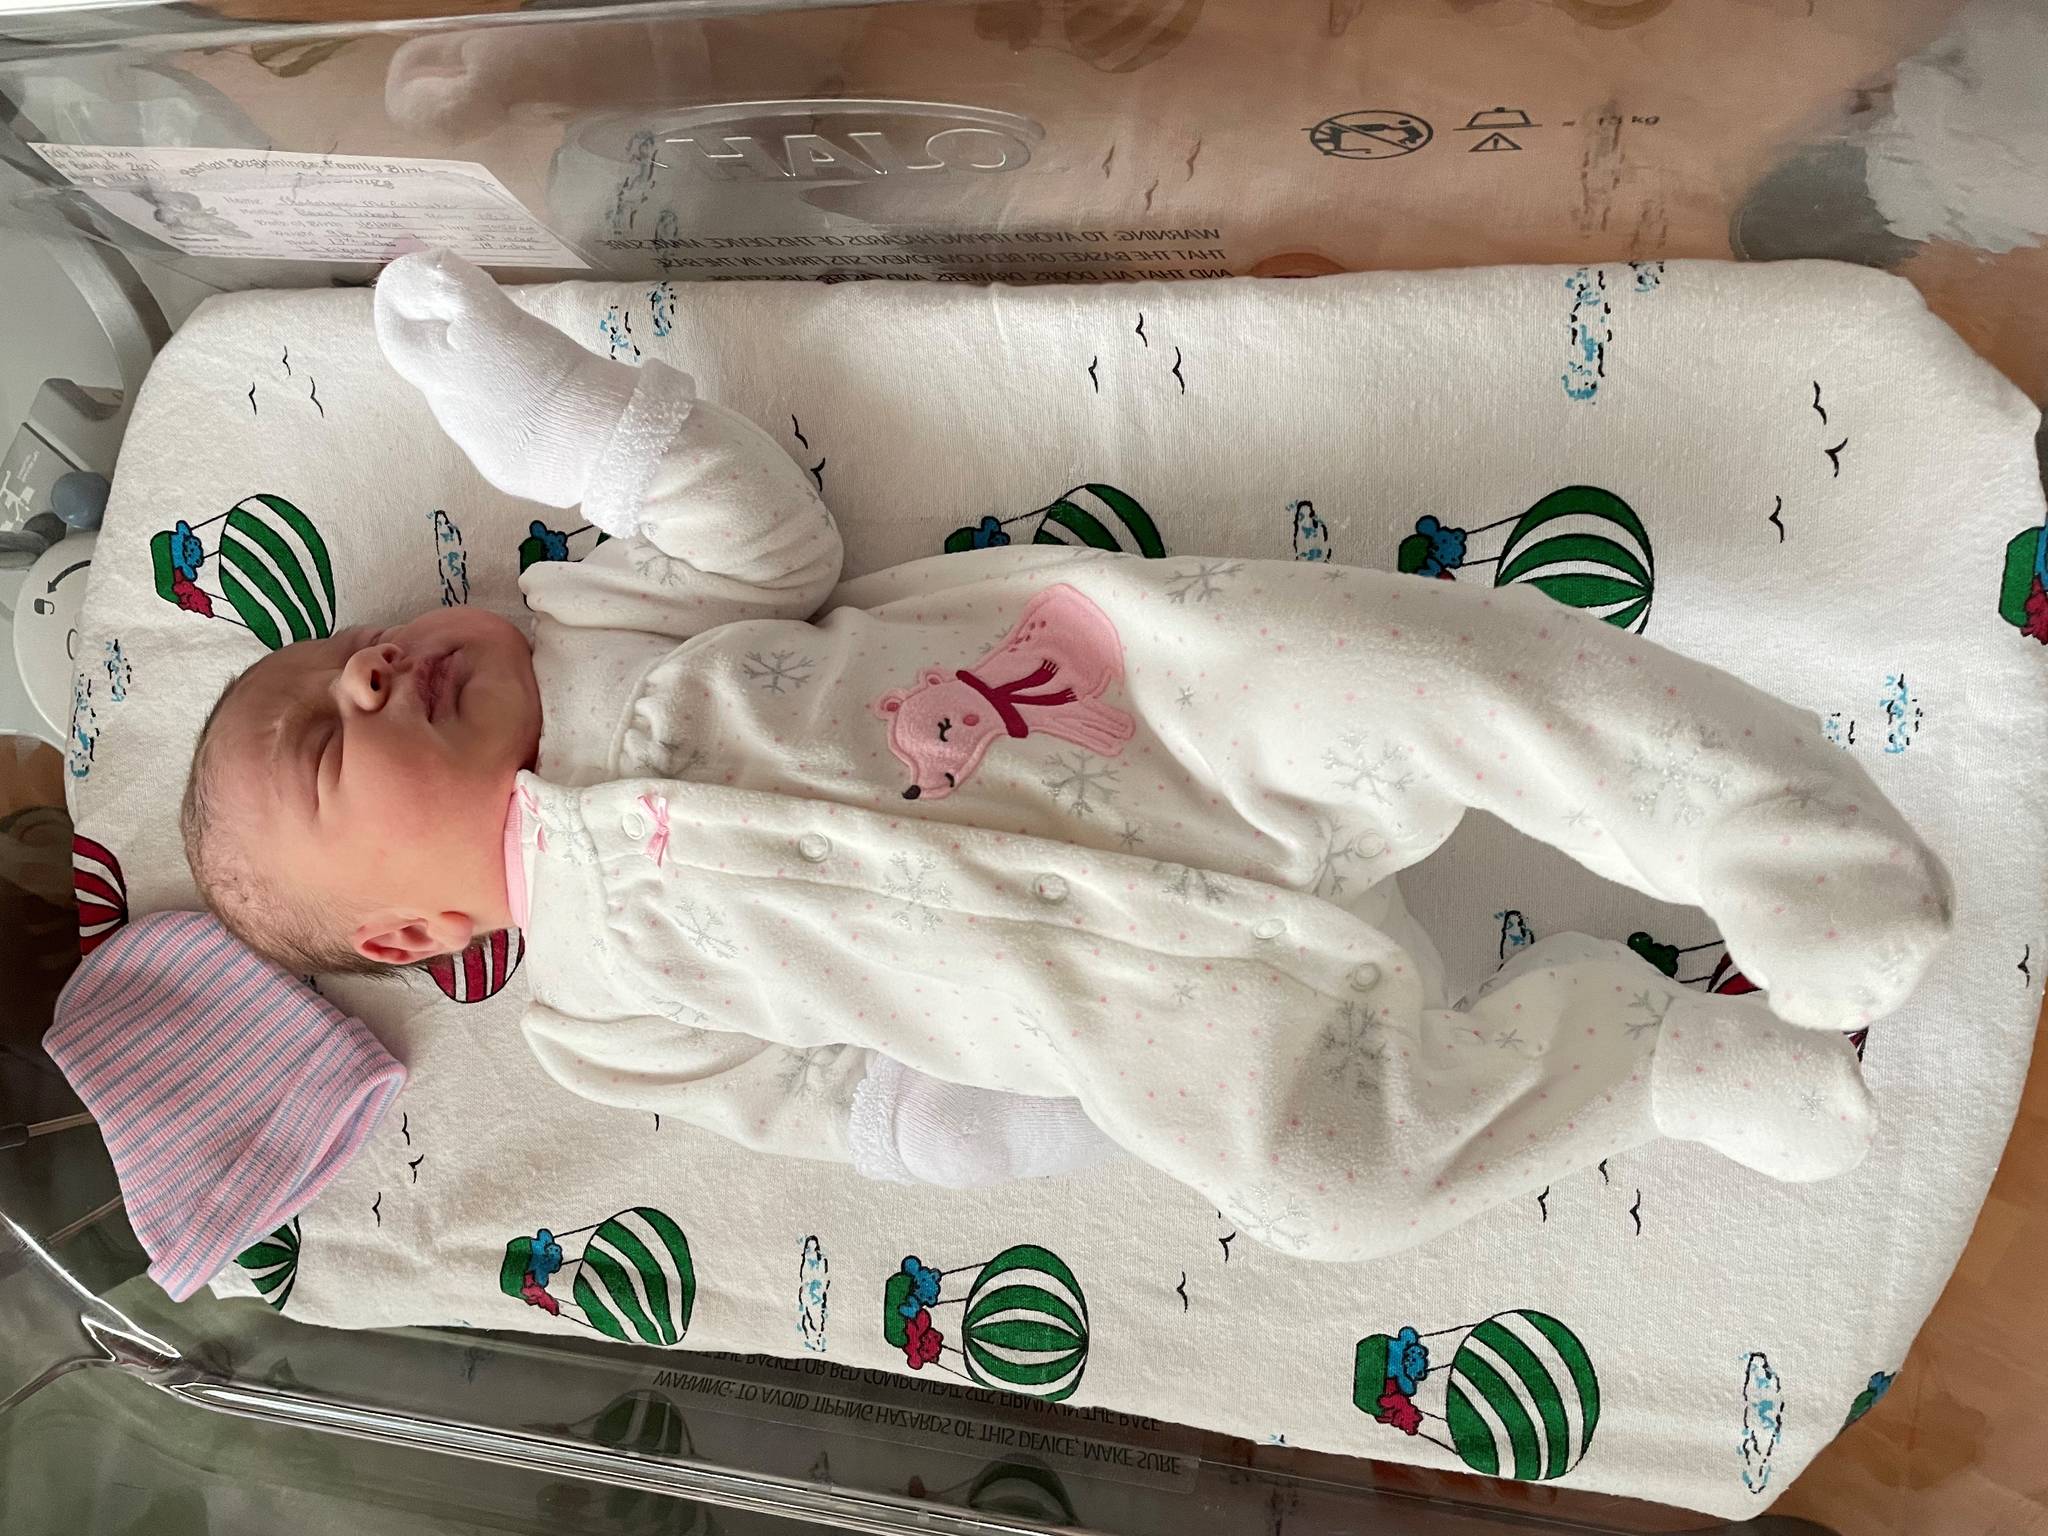 Madelynn Rose McCallister, born at 7:50 a.m. on Jan. 5, 2021, was the first baby born at Bartlett Regional Hospital this year. (Courtesy Photo / BRH)